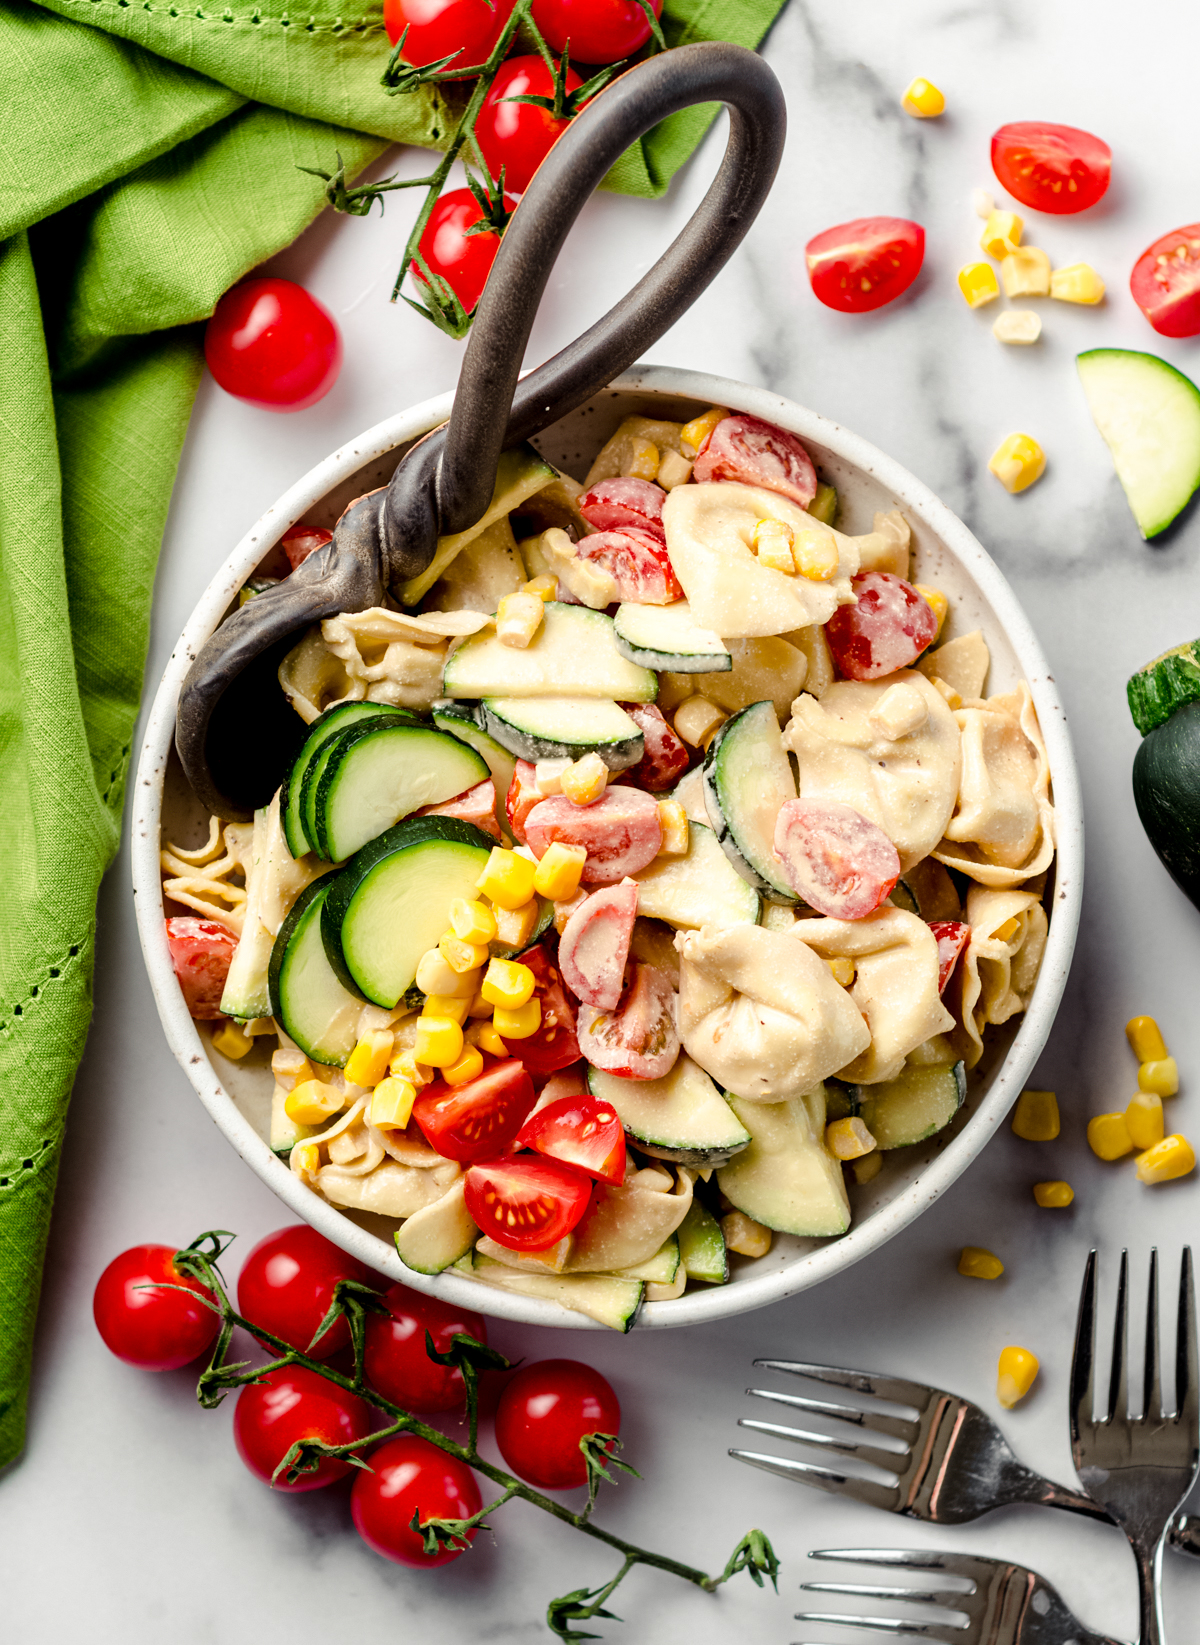 Tortellini pasta salad with zucchini, corn, and tomatoes in a bowl with a serving spoon.